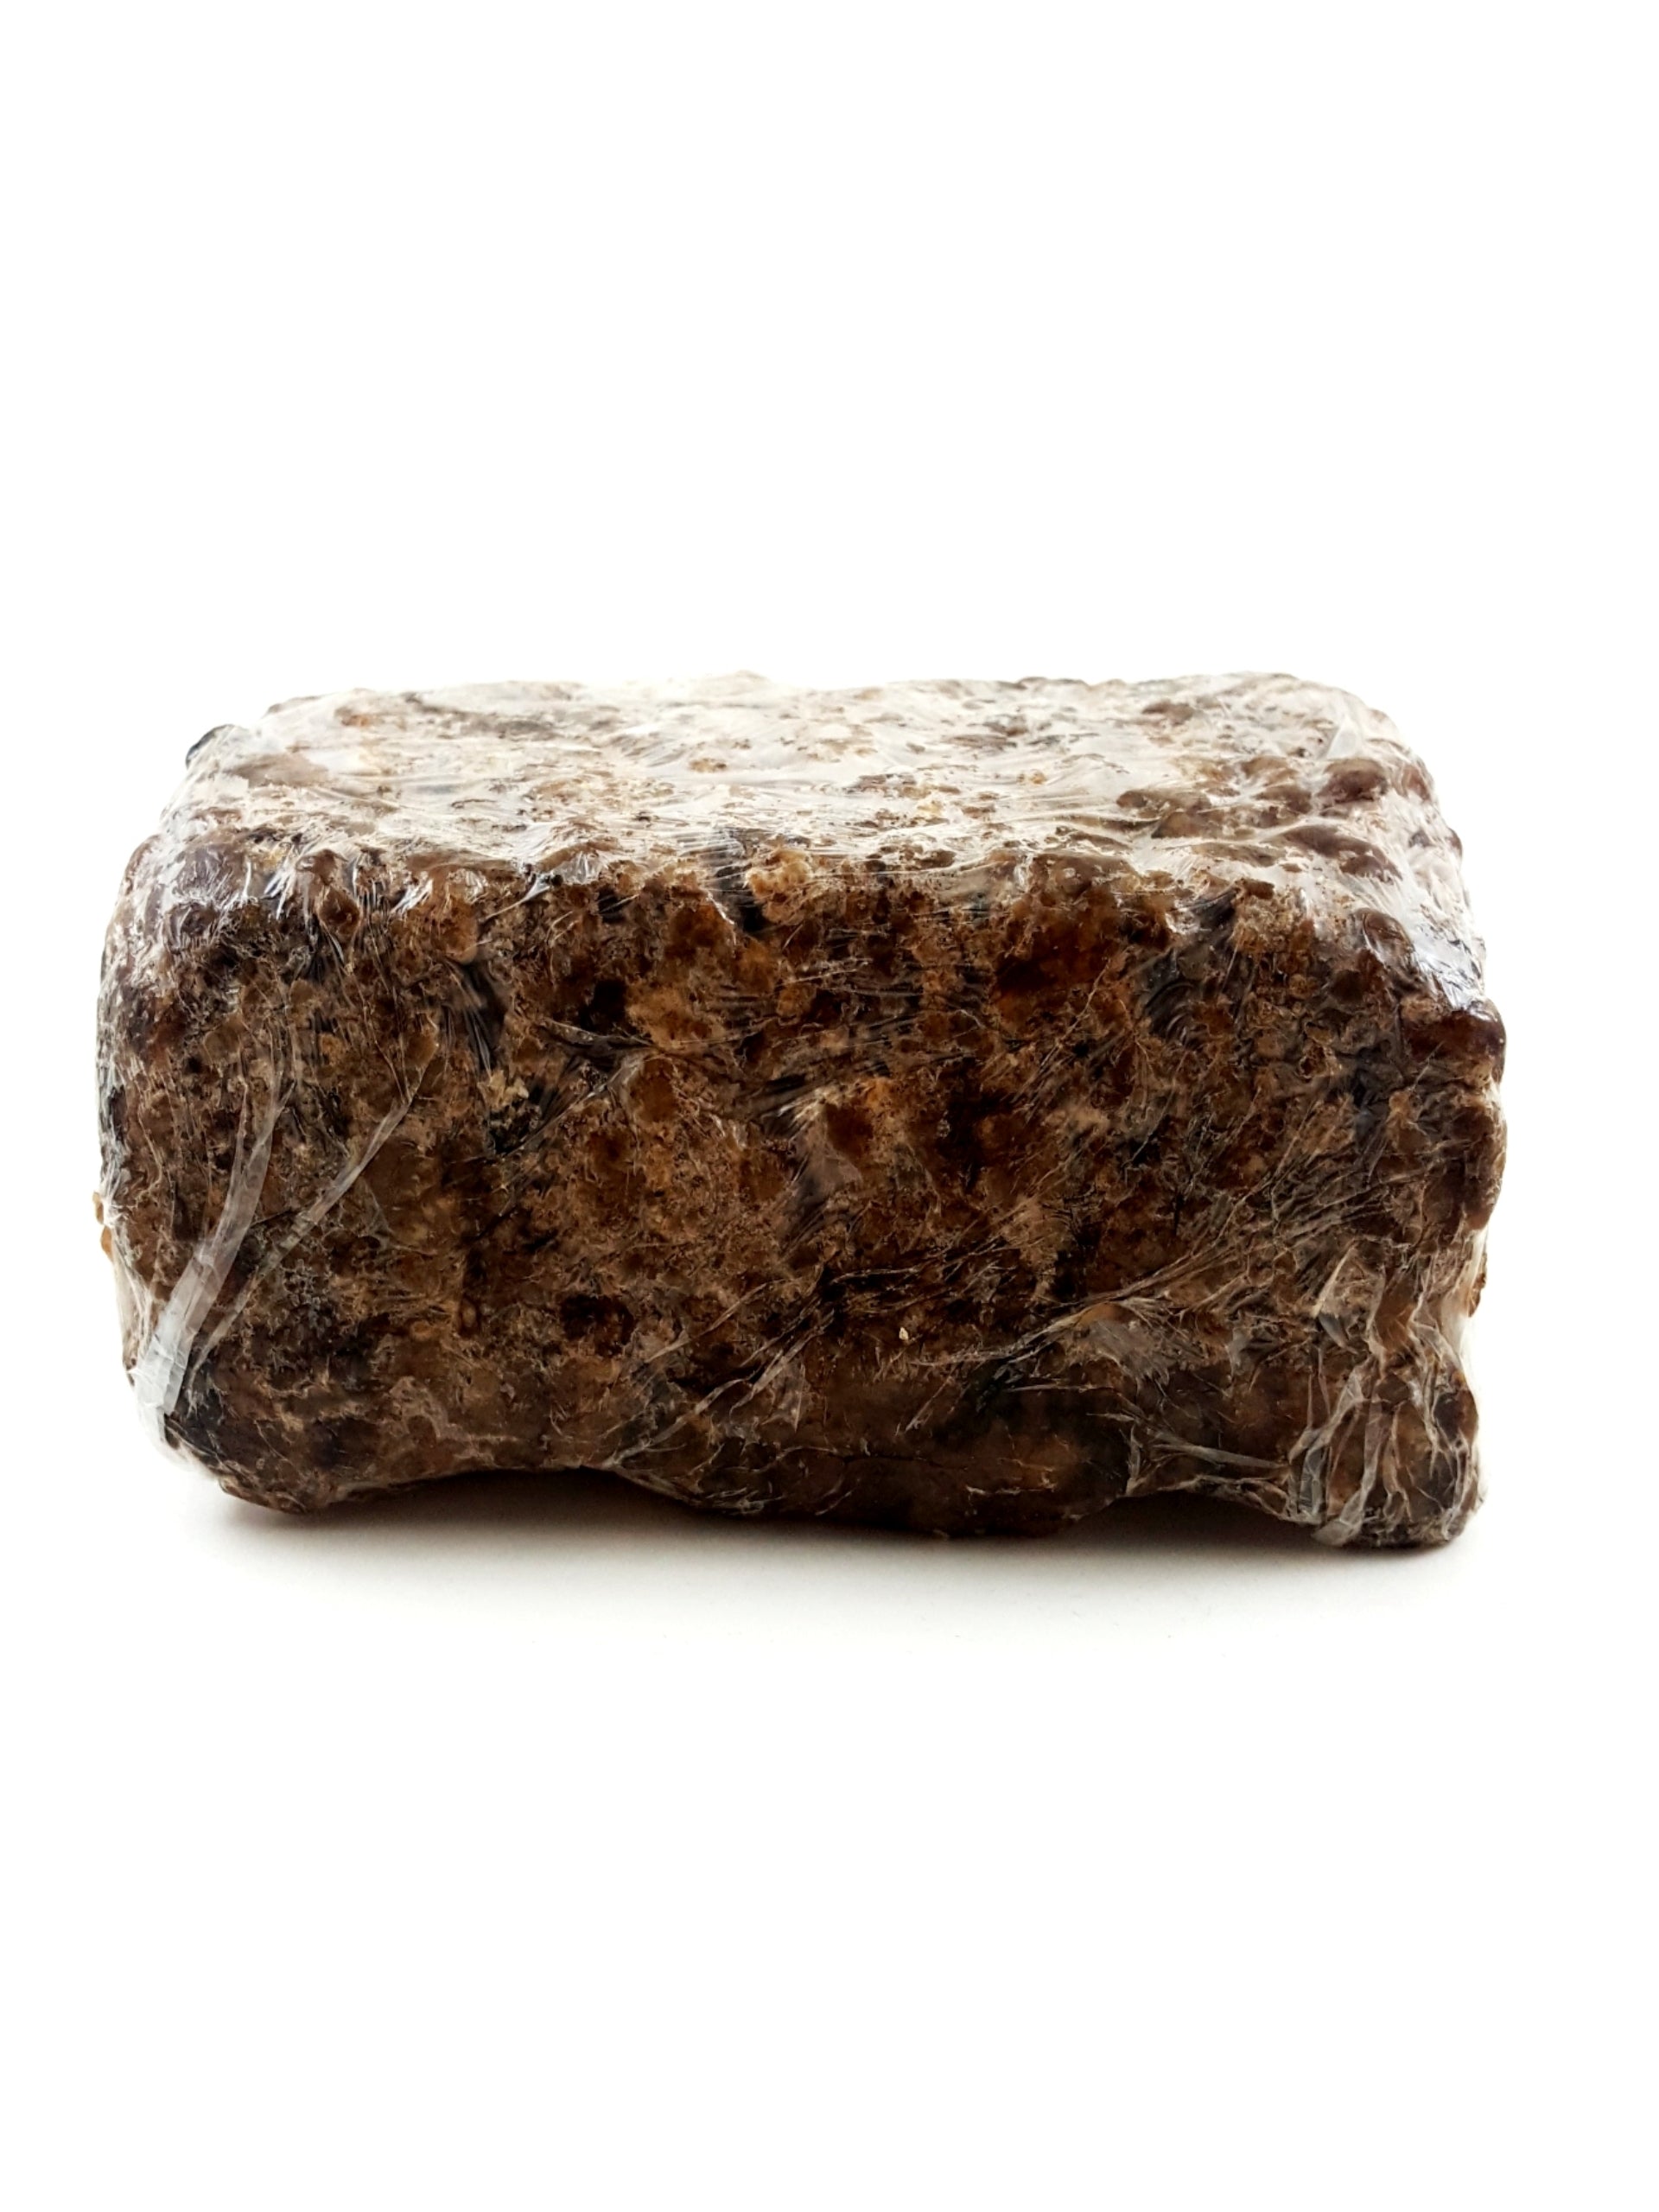 Raw African Black Soap for Healthier Skin and Hair 1lb